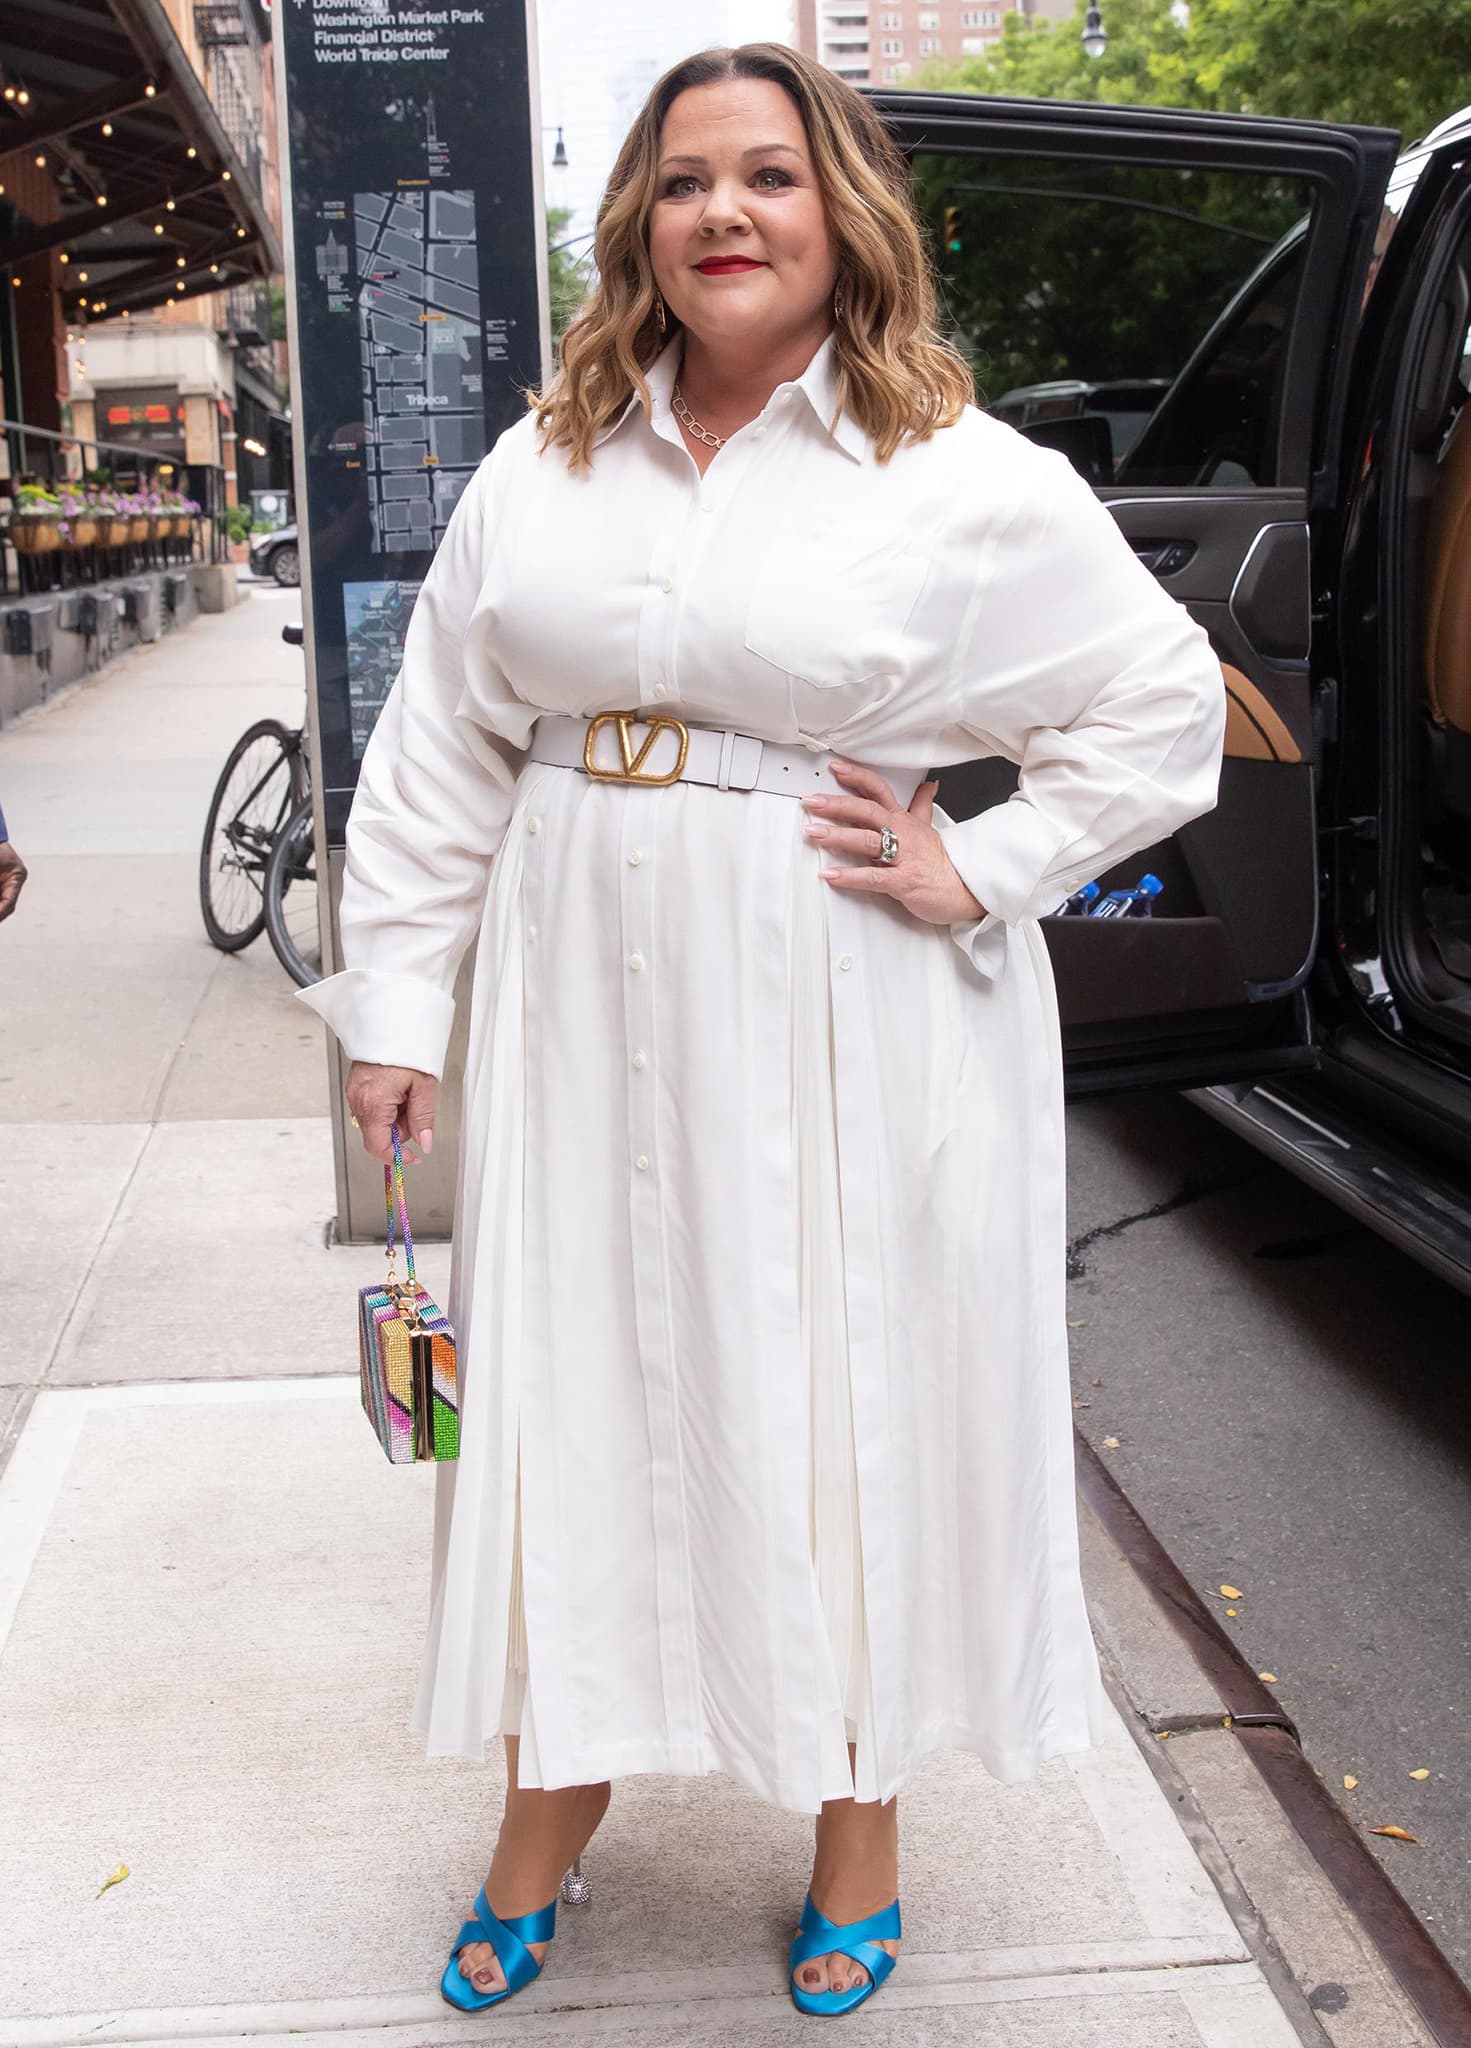 Melissa McCarthy promotes her new shows on The Tonight Show Starring Jimmy Fallon